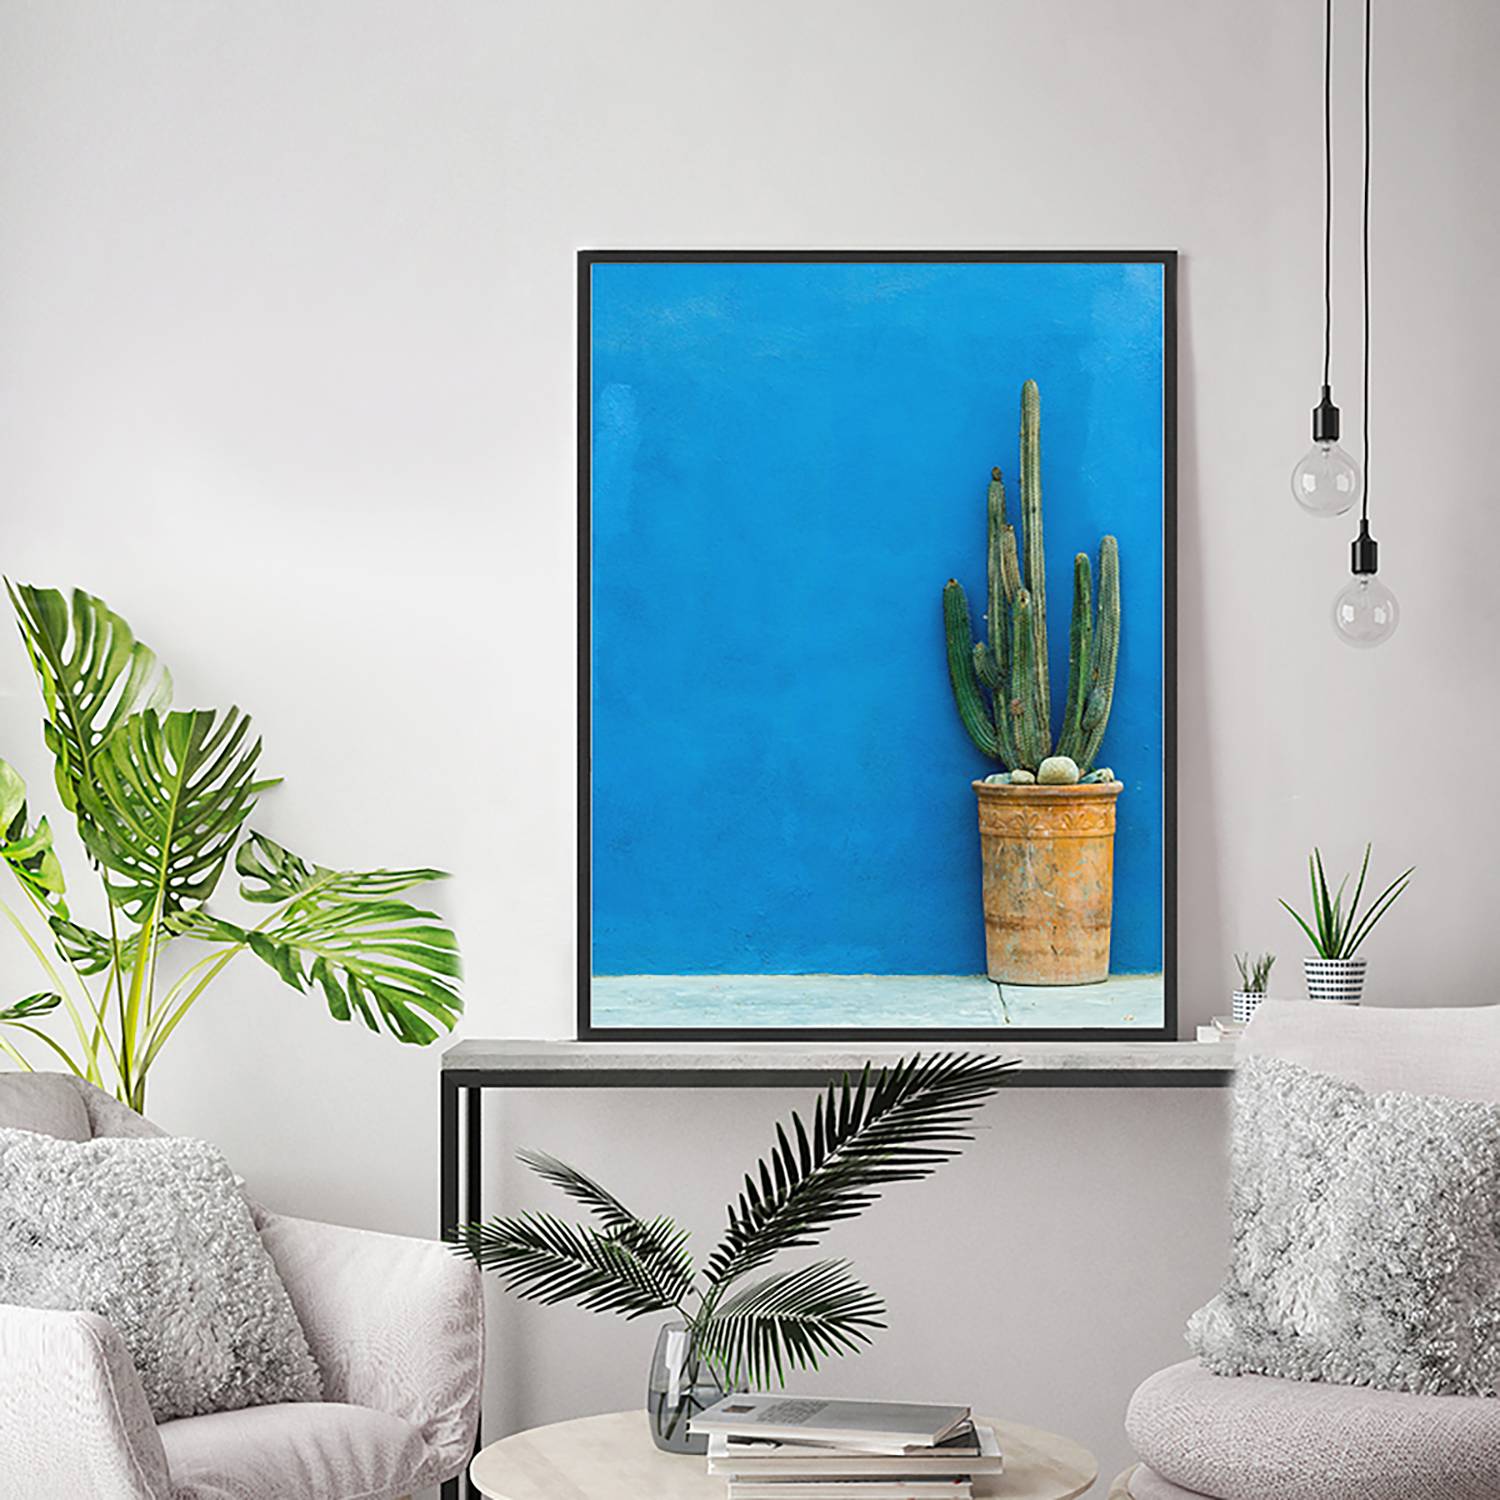 Bild Blue Wall with Cactus 